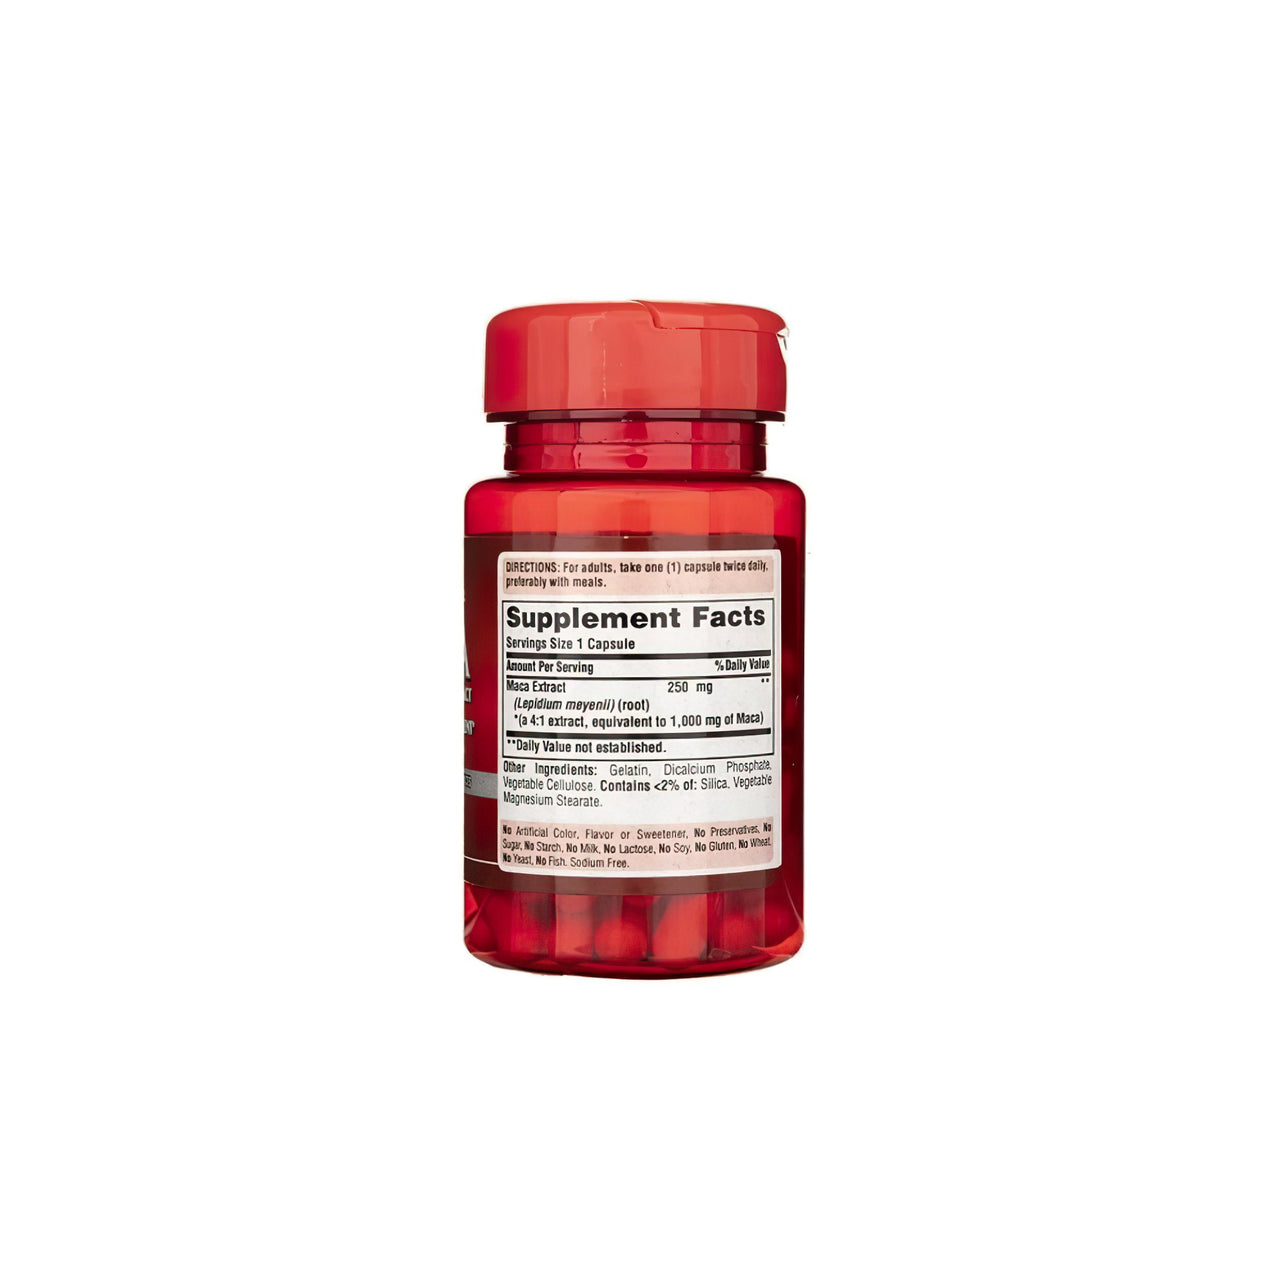 A bottle of Puritan's Pride Maca 1000 mg 60 Rapid Release Capsules on a white background.